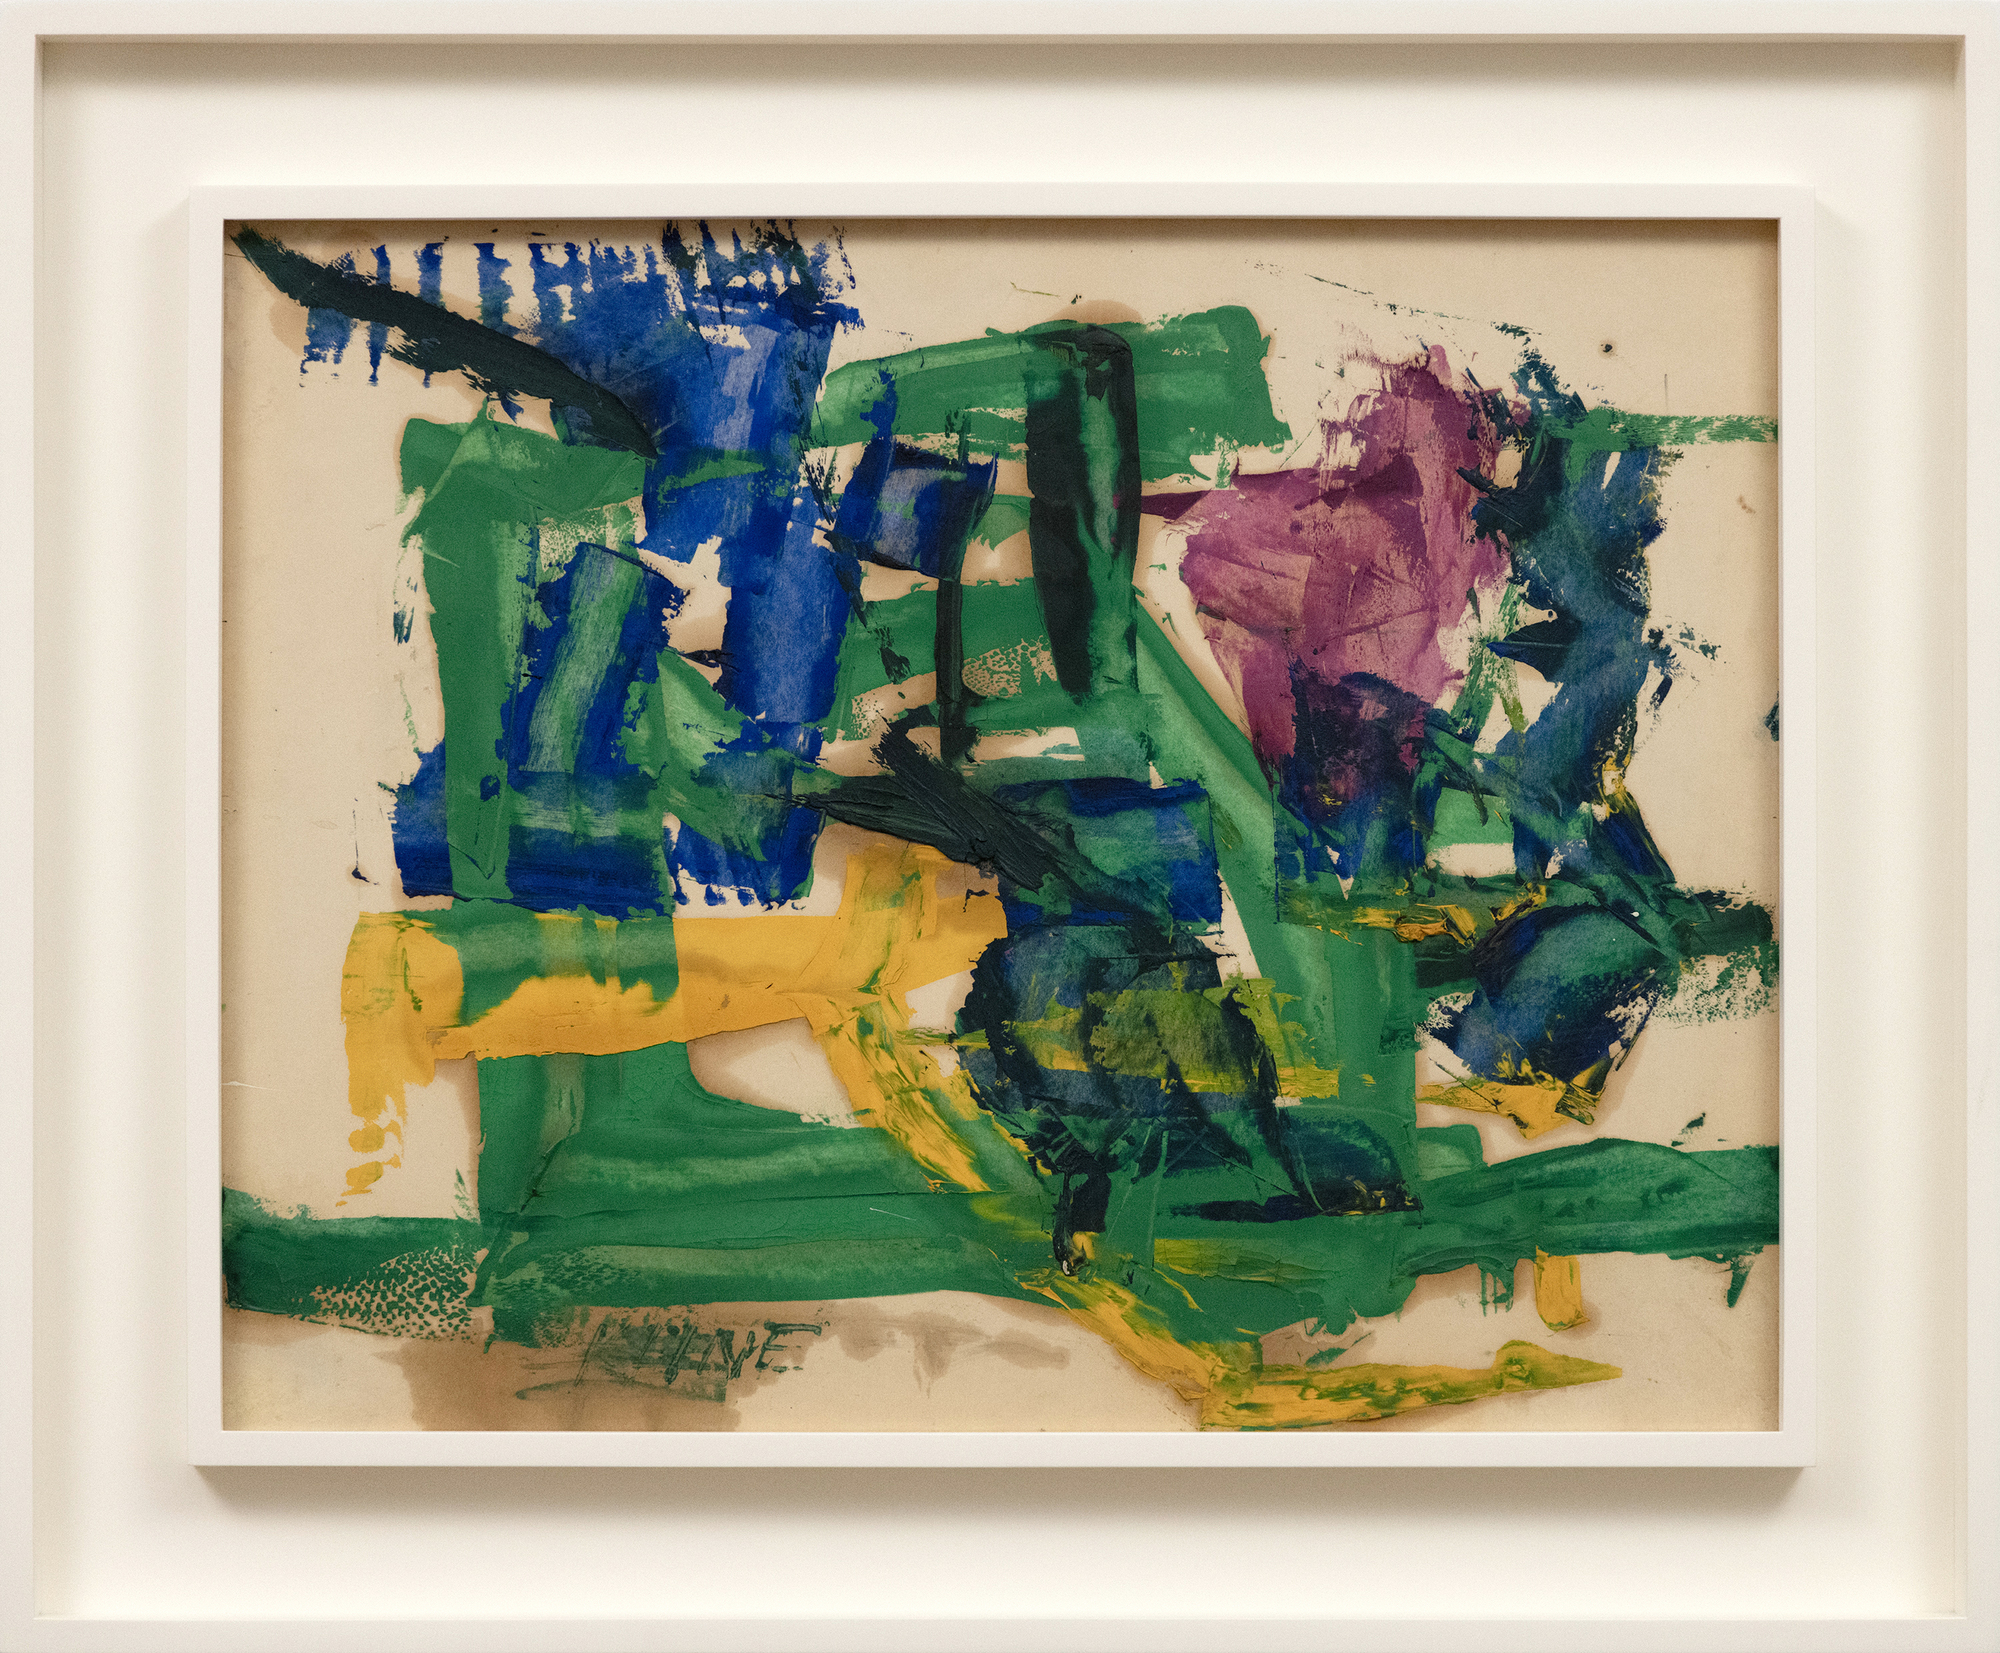 FRANZ KLINE - Untitled, No. 7246 - oil on paper laid on board - 18 1/8 x 23 1/4 in.